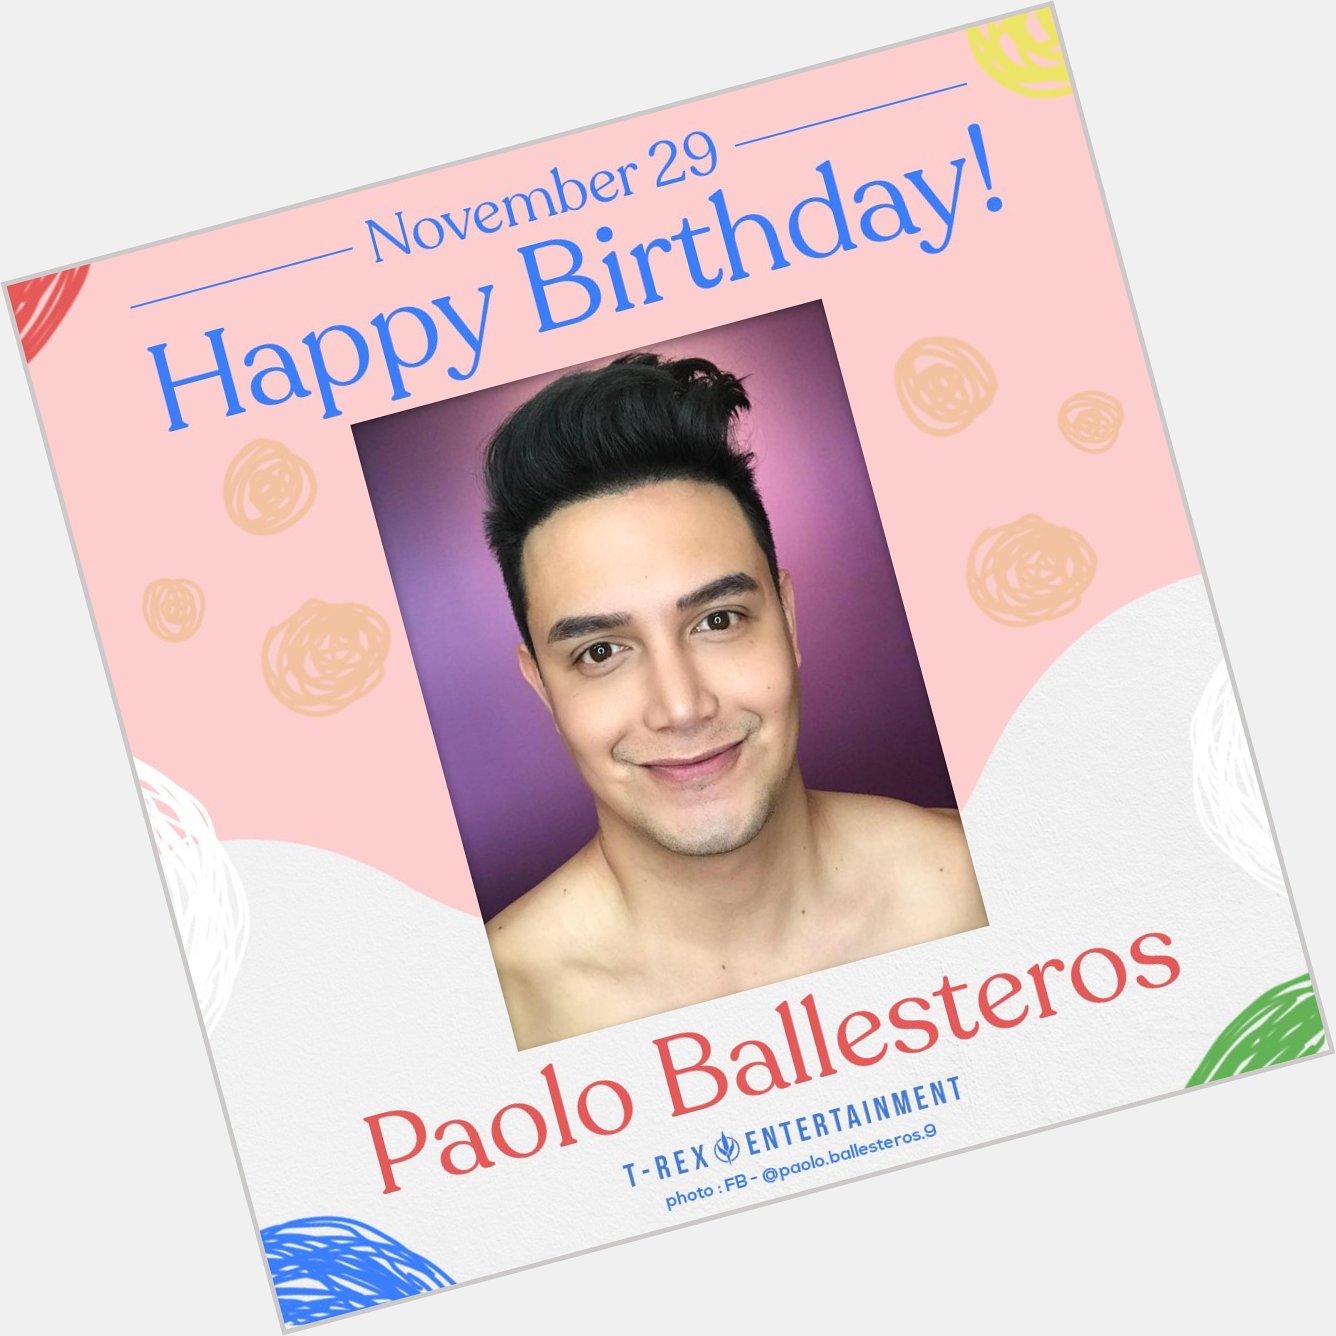 Happy birthday to our very own,  Paolo Ballesteros Enjoy your day. You deserve it! 